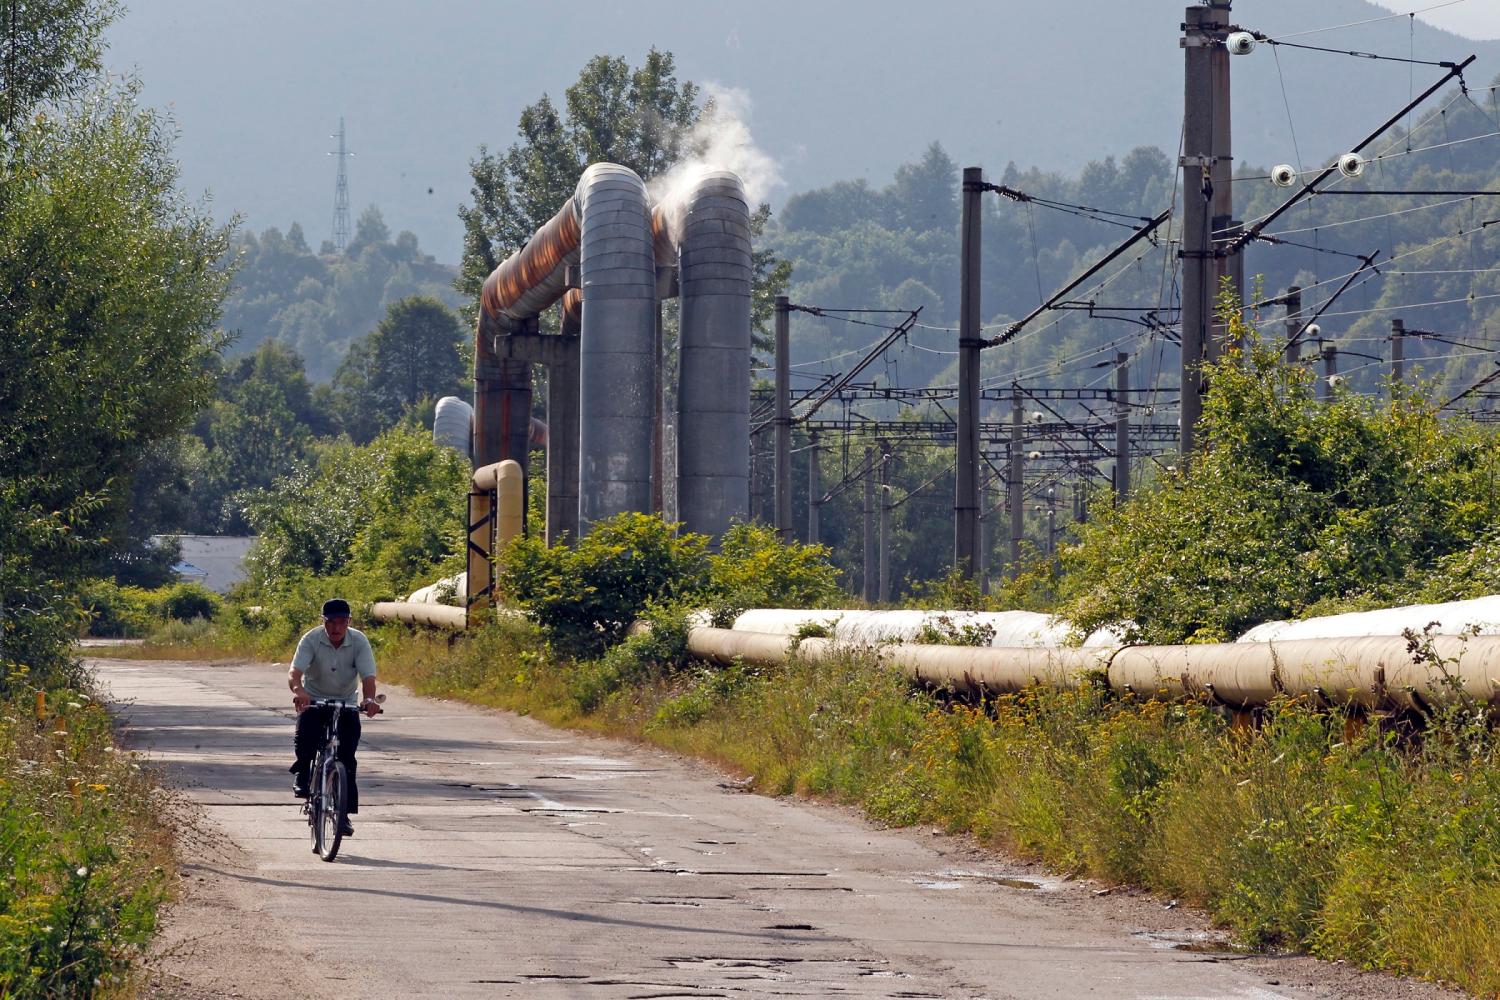 A man rides a bicycle along an empty road in Aninoasa, 330 km (202 miles) west of Bucharest July 31, 2013. If joining the European Union was supposed to lift Romania out of poverty, in Aninoasa, a town of 4,800 people in the mountainous Jiu Valley region, it has yet to work. Six years after Romania's accession to the EU, not only is Aninoasa still poor - it has also become the first town in Romania to file for insolvency. Picture taken July 31, 2013. REUTERS/Bogdan Cristel (ROMANIA - Tags: SOCIETY BUSINESS EMPLOYMENT POVERTY) ATTENTION EDITORS: PICTURE 21 OF 23 FOR PACKAGE 'ROMANIA'S BANKRUPT TOWN'. SEARCH 'ANINOASA' FOR ALL IMAGES - GM1E98V1AG501